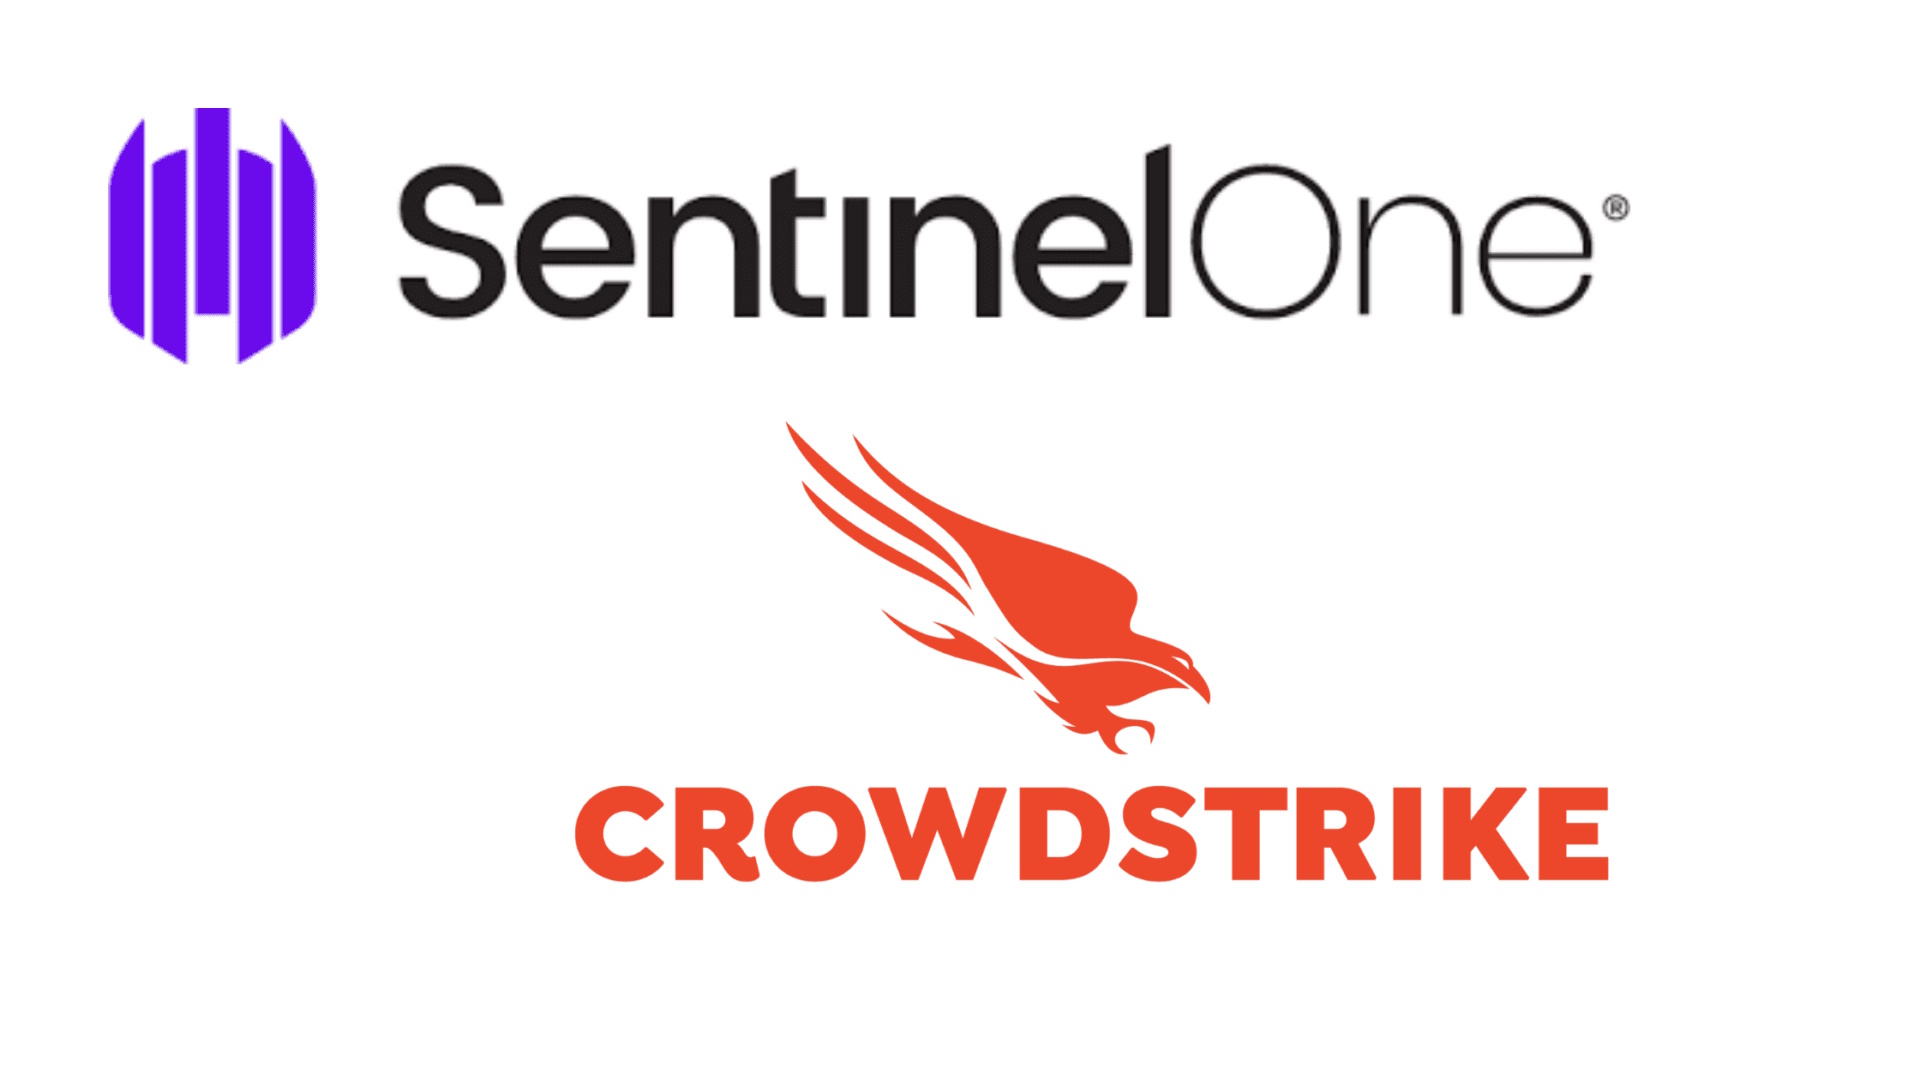 whats better SentinelOne or CrowdStrike ?